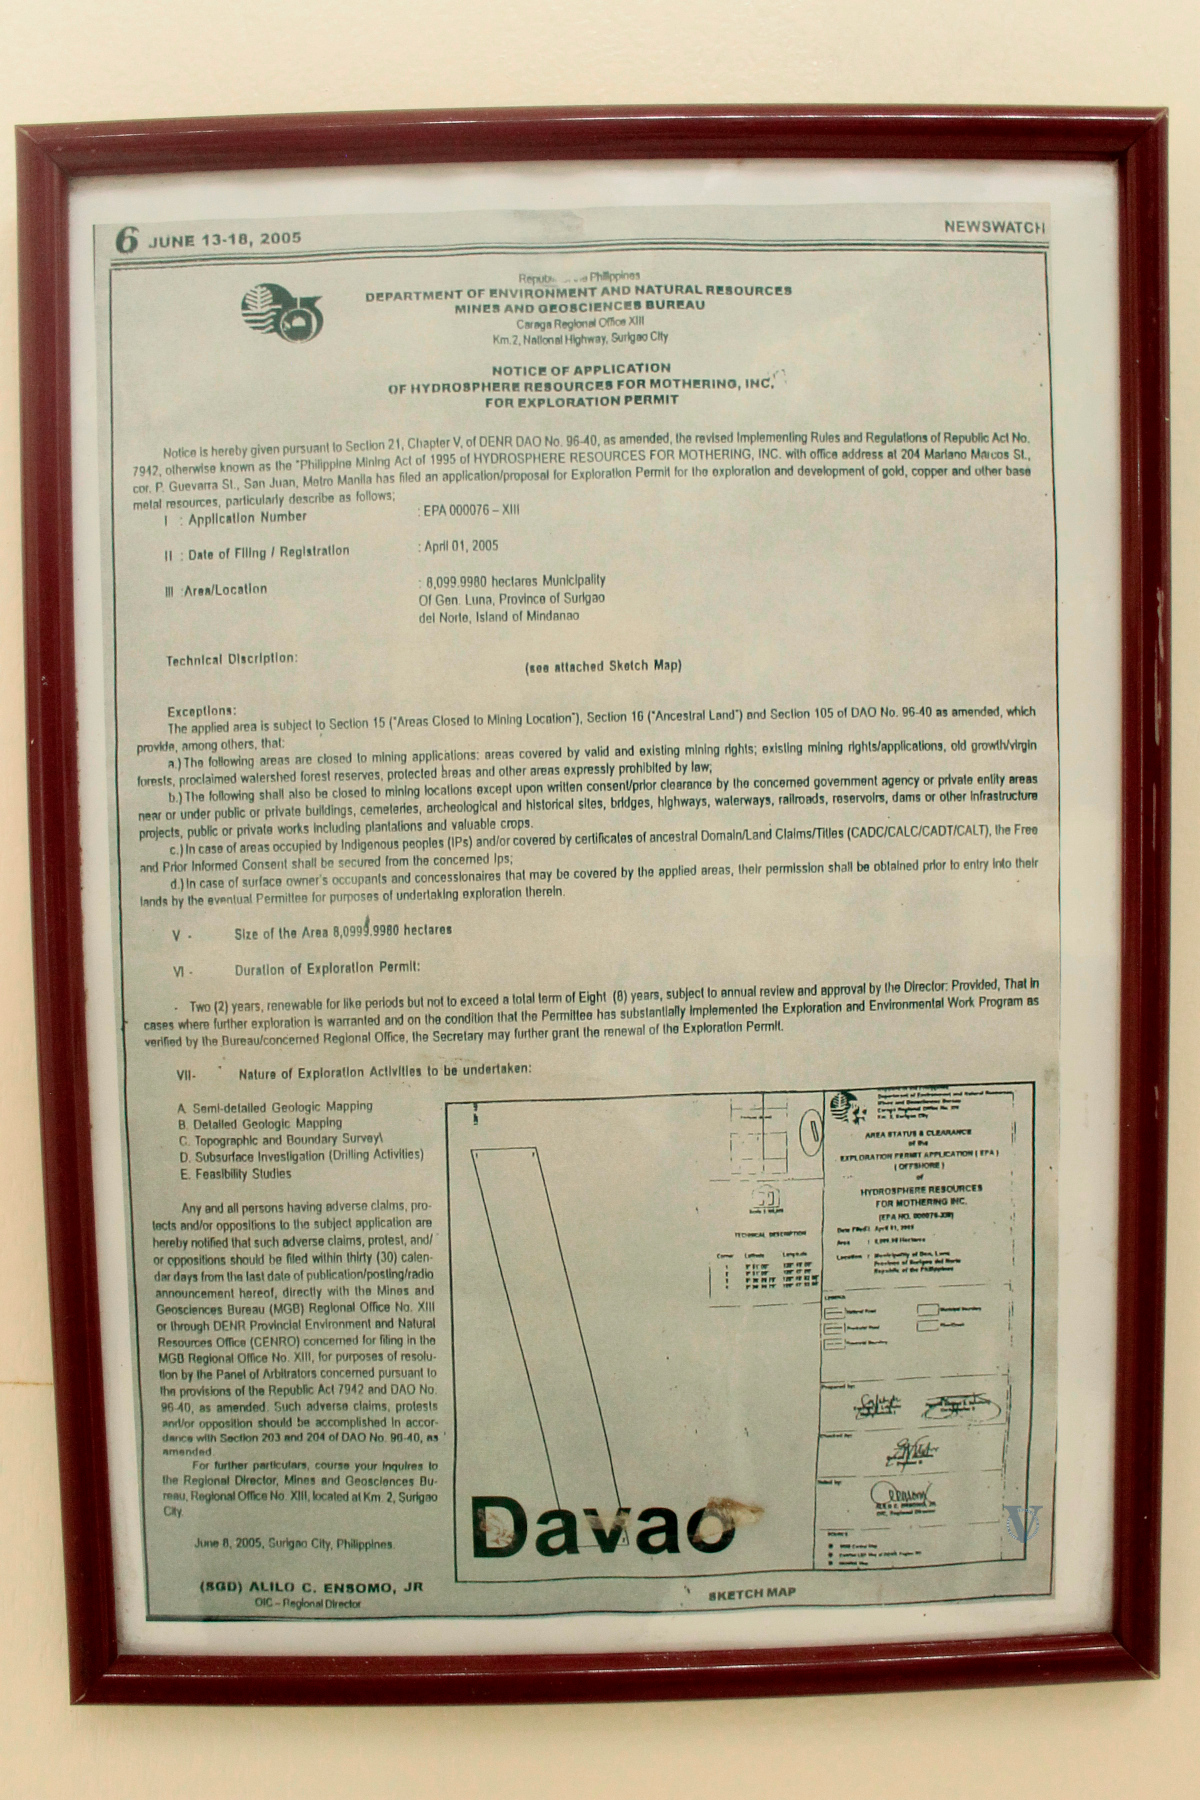 One of Hydrosphere Resources for Mothering, Inc.'s exploration permit applications, displayed at the Batac World Peace Center (photo by Judith Camille Rosette)